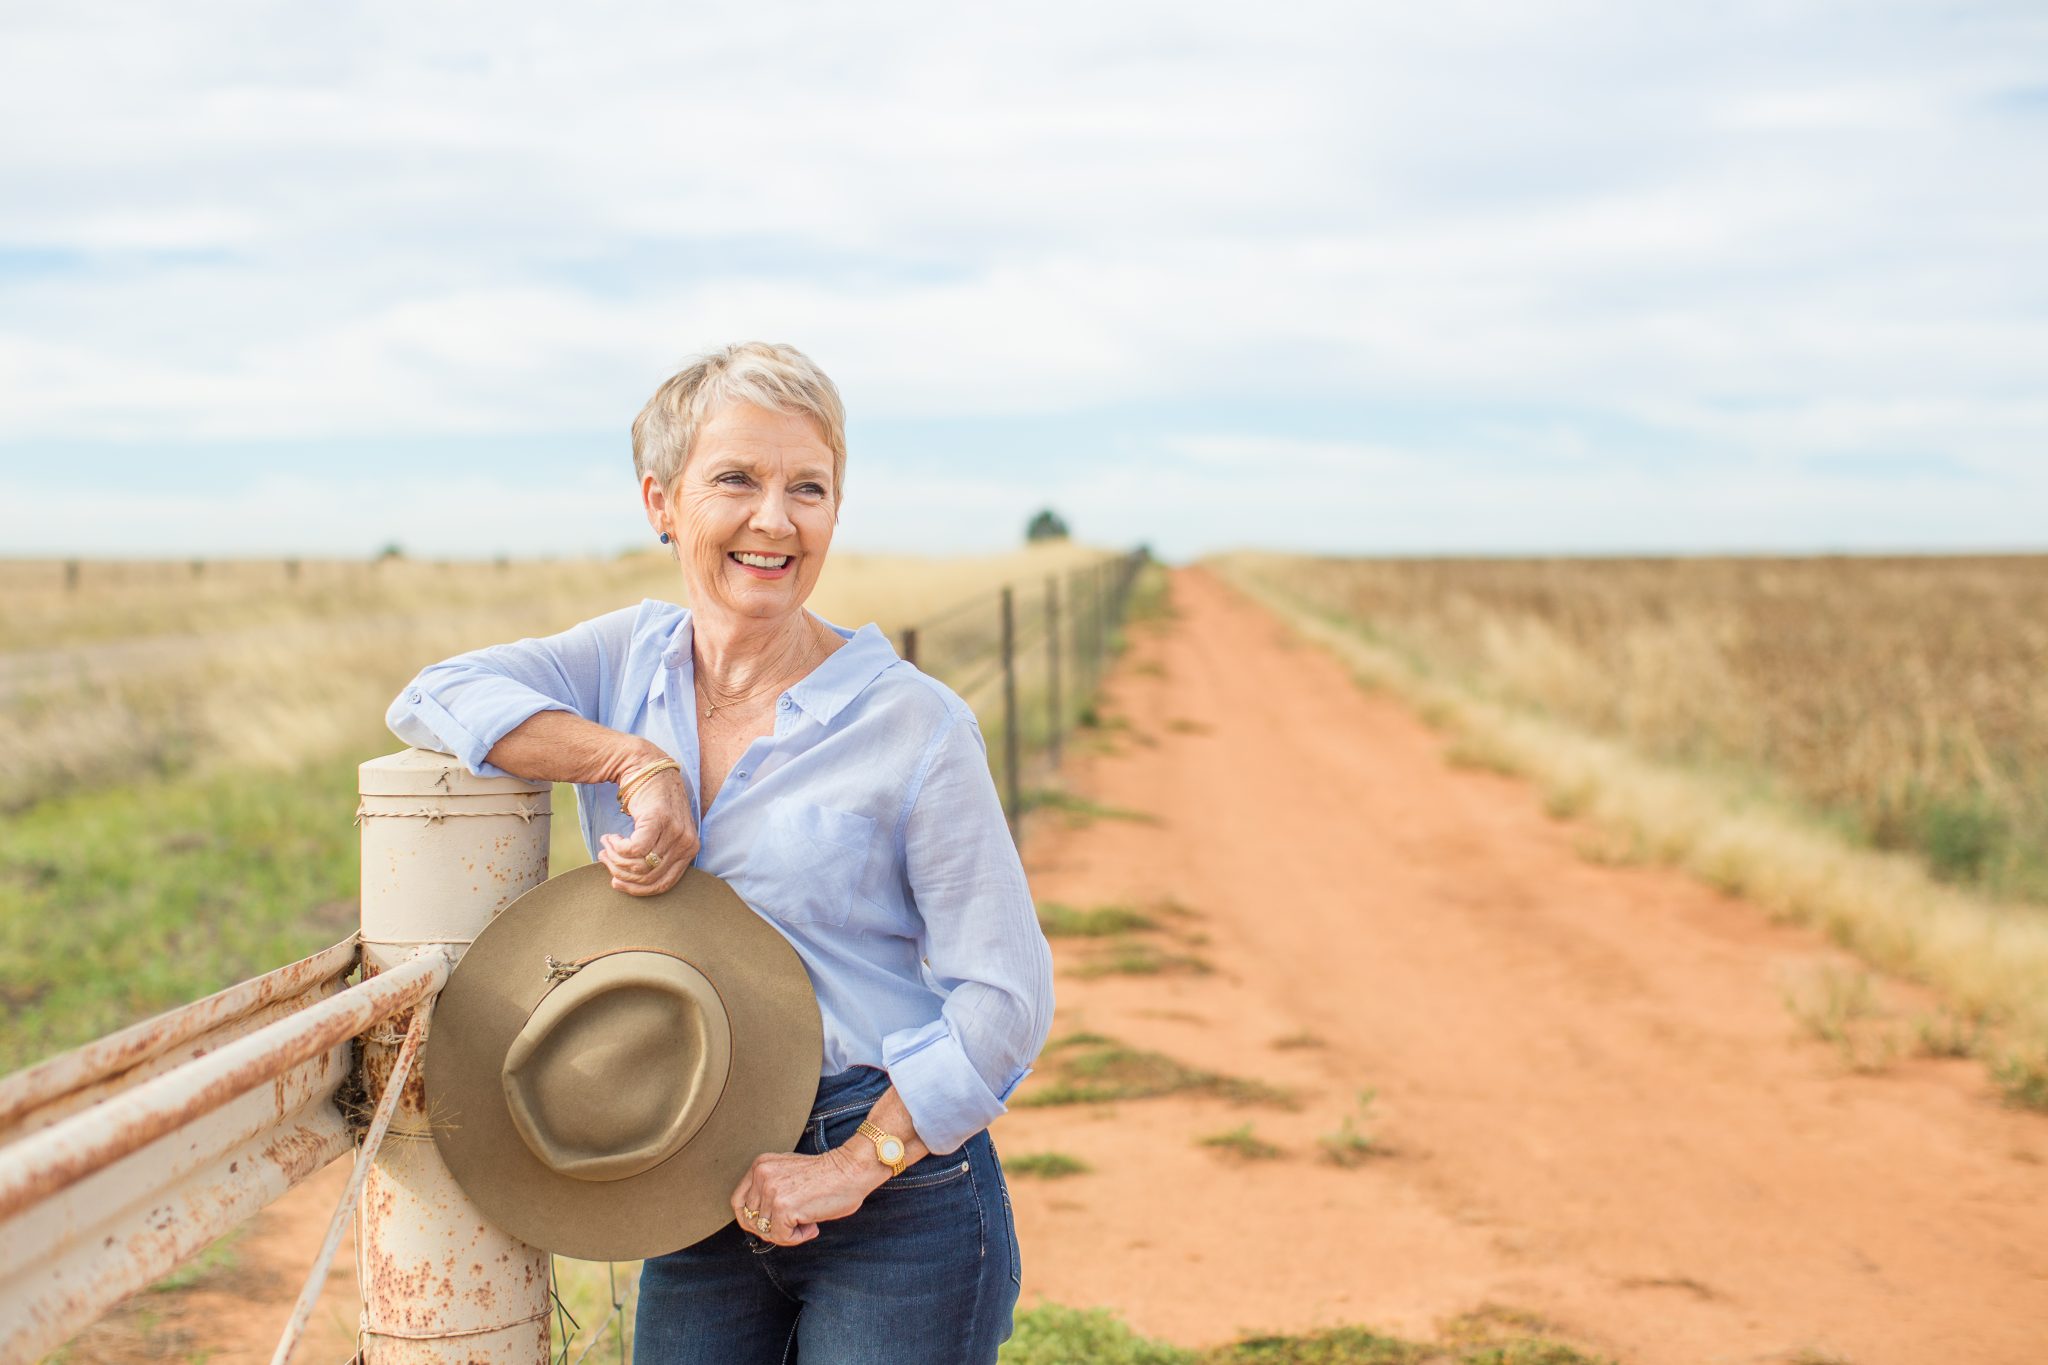 Kay Hull, Chair of the AgriFutures Australia Board